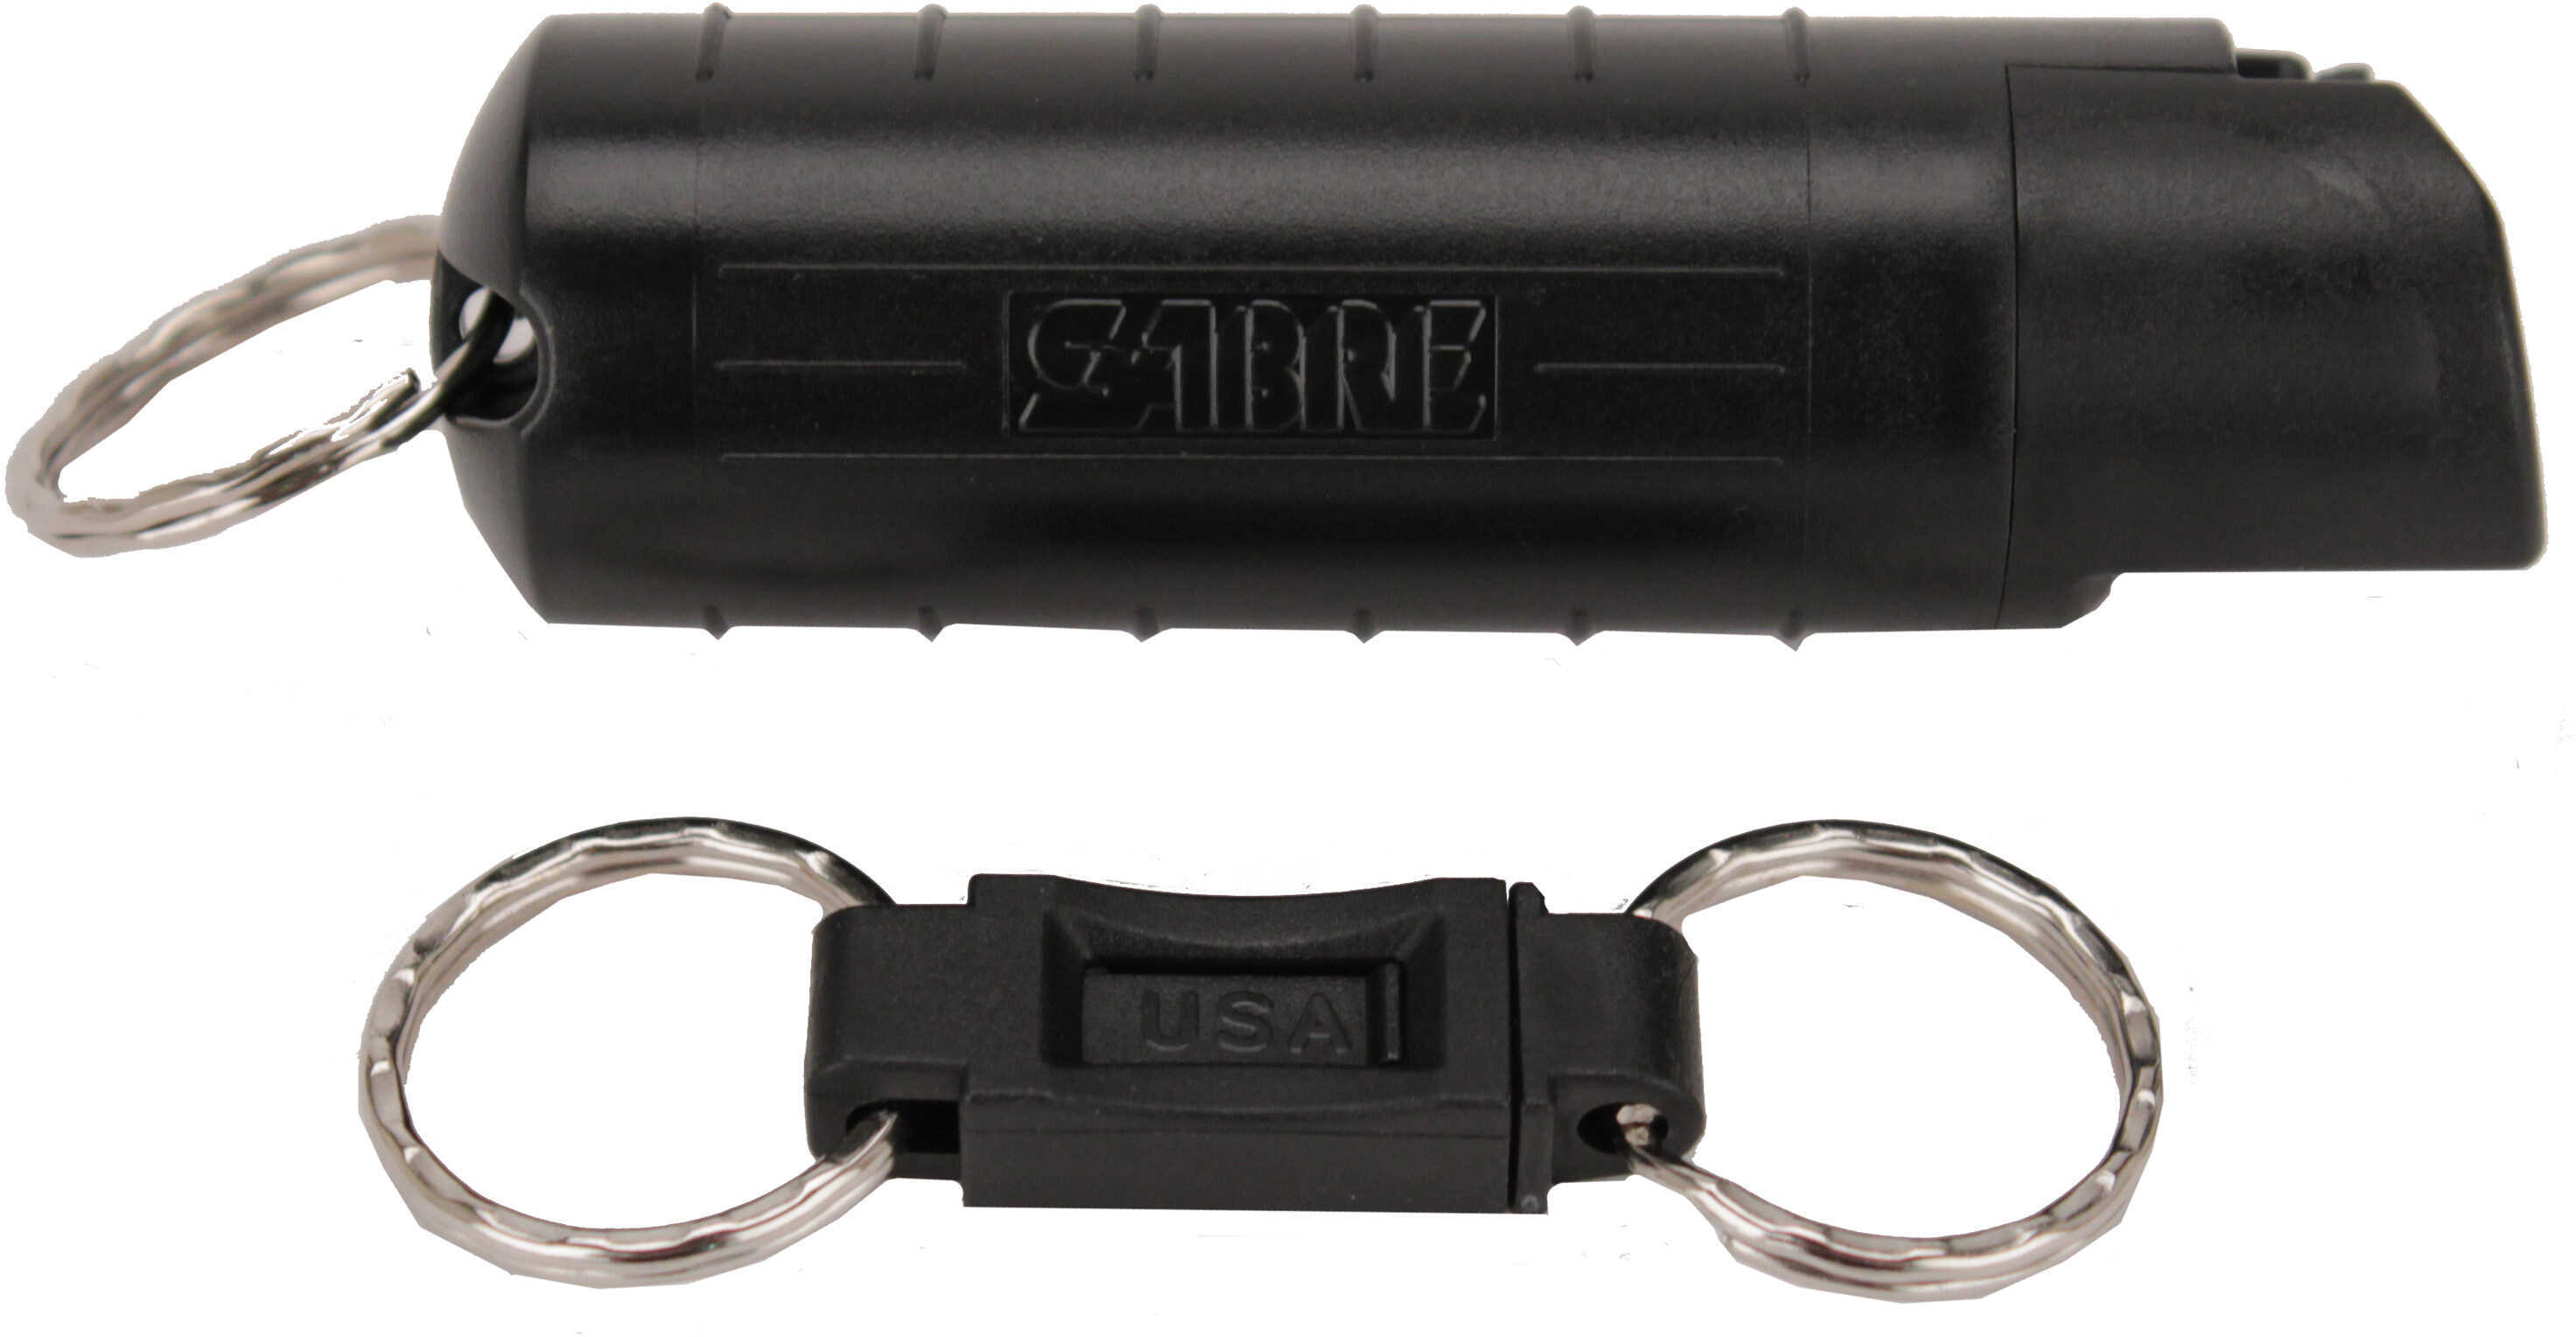 Sabre 3-in-1 Key Chain Pepper Spray Black Hardcase with Quick Release Key Ring Model: HC-14-BK